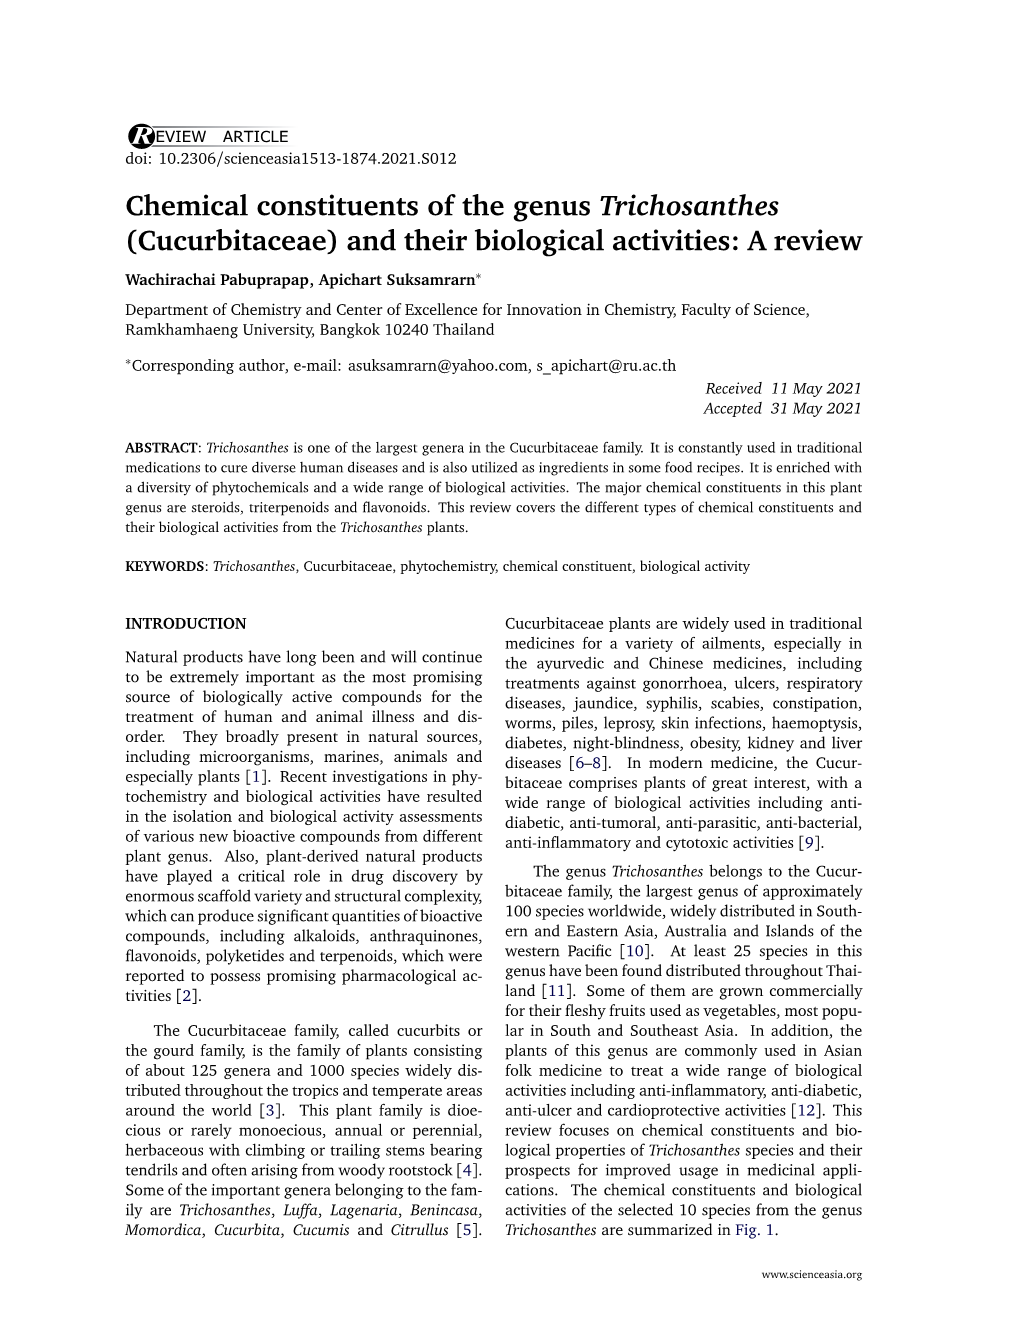 Chemical Constituents of the Genus Trichosanthes (Cucurbitaceae) and Their Biological Activities: a Review